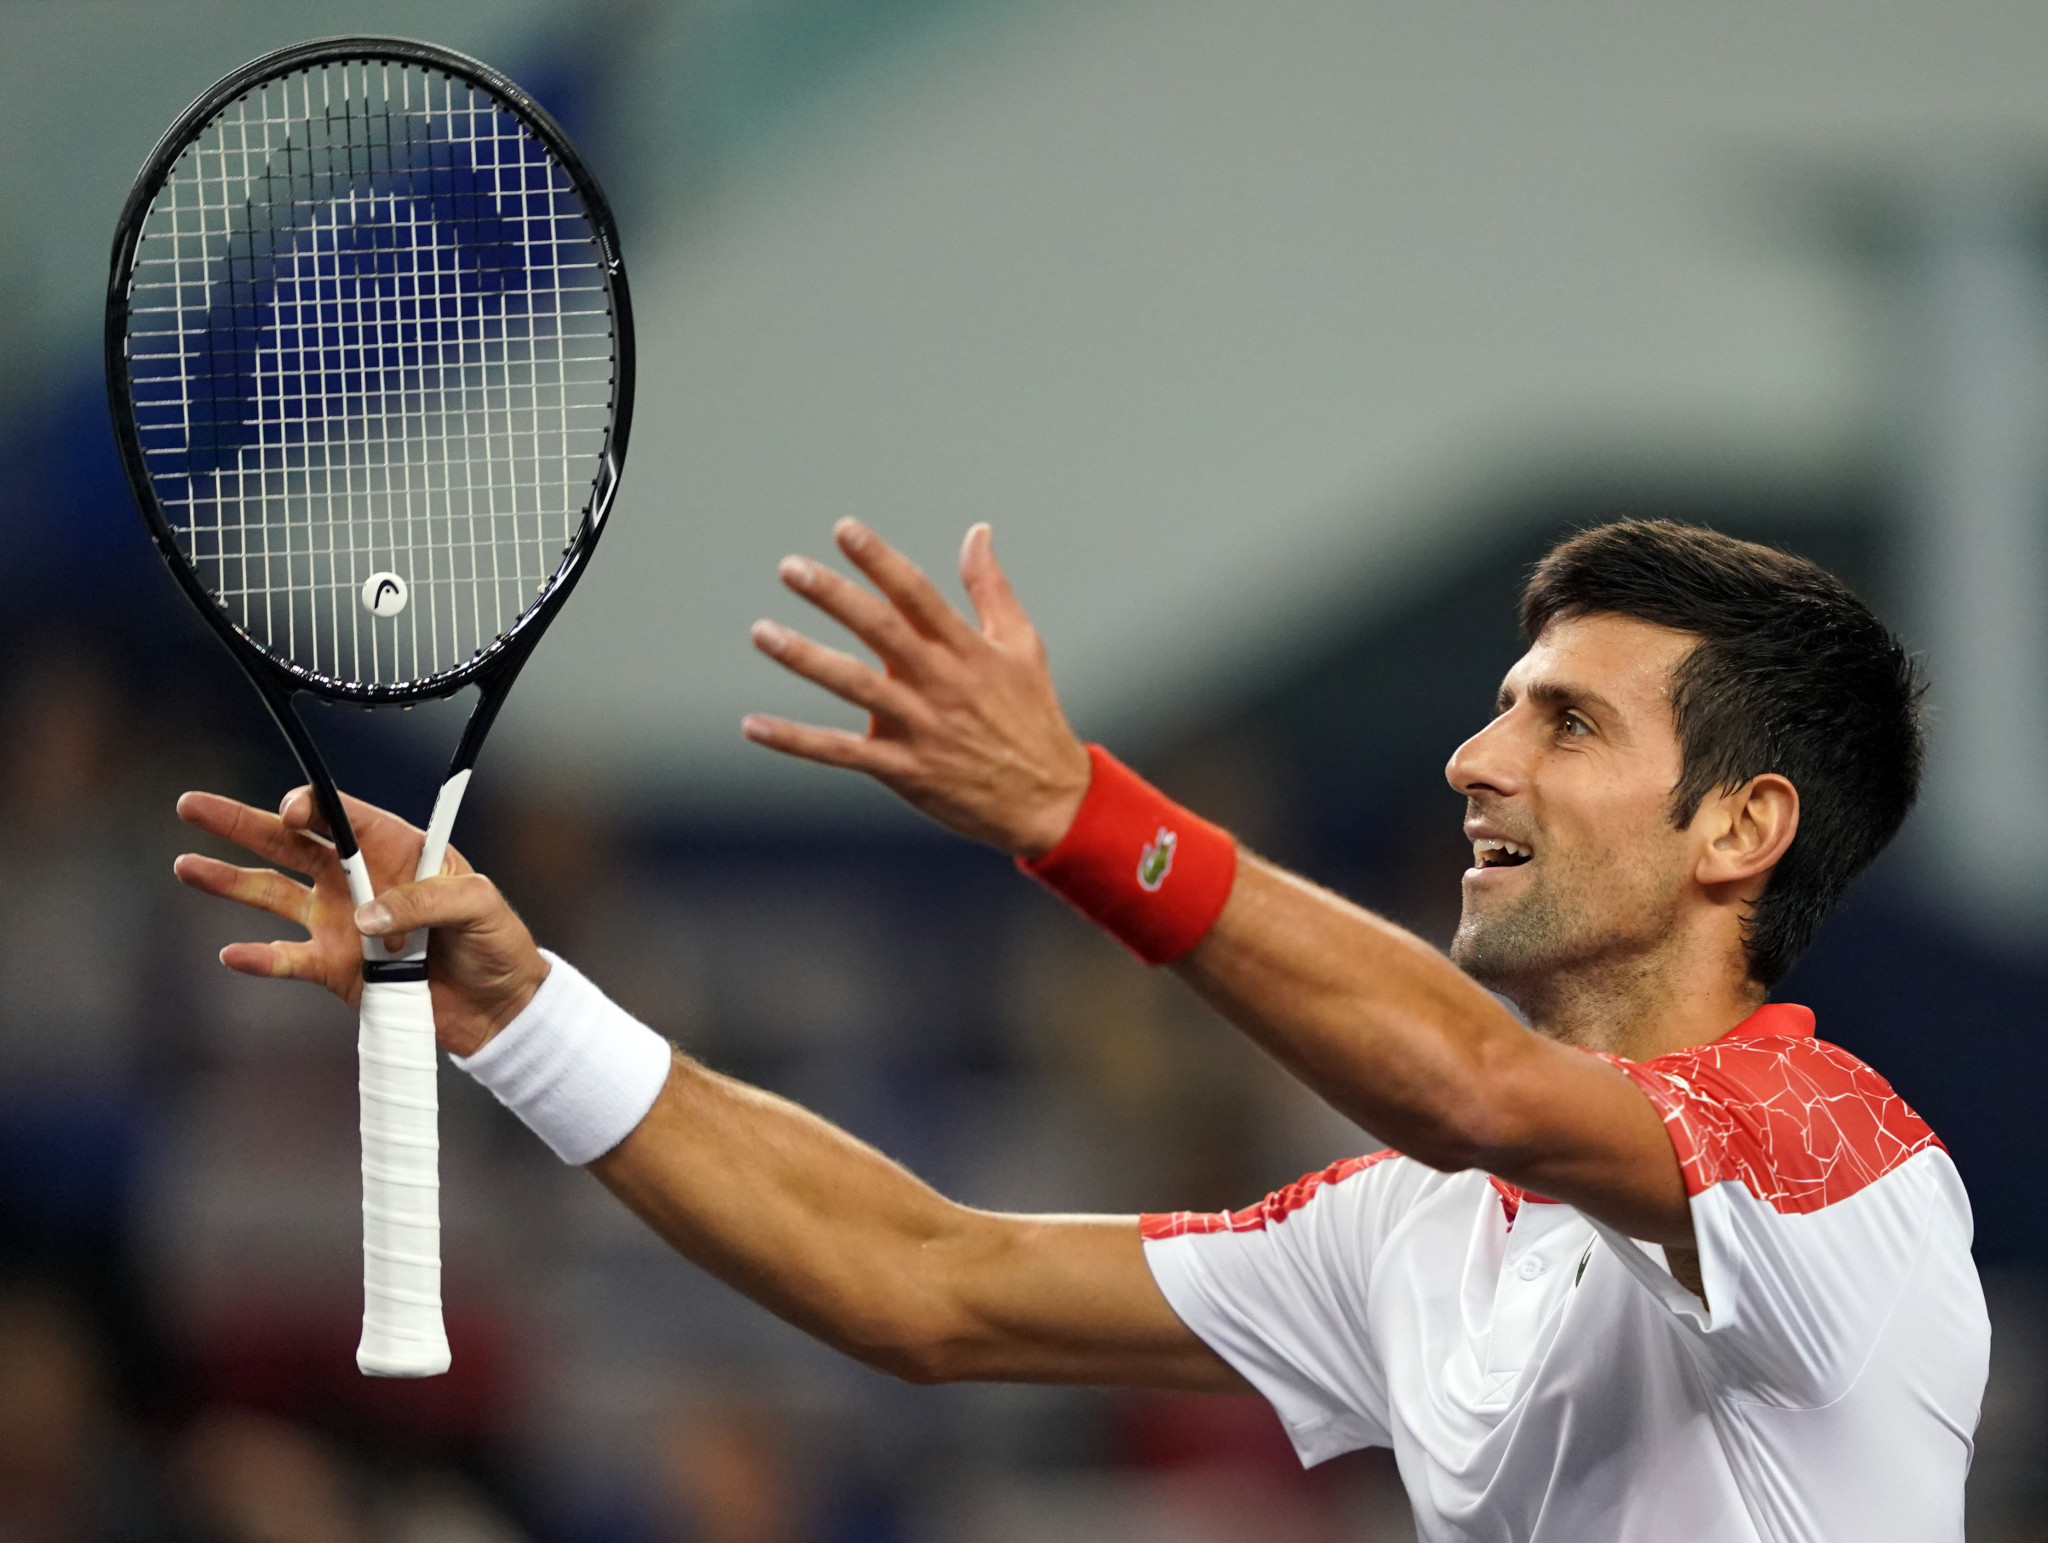 Serbia's Novak Djokovic celebrates beating Jérémy Chardy of France at the Shanghai Masters at the Qizhong Forest Sports City Arena in China ©Getty Images